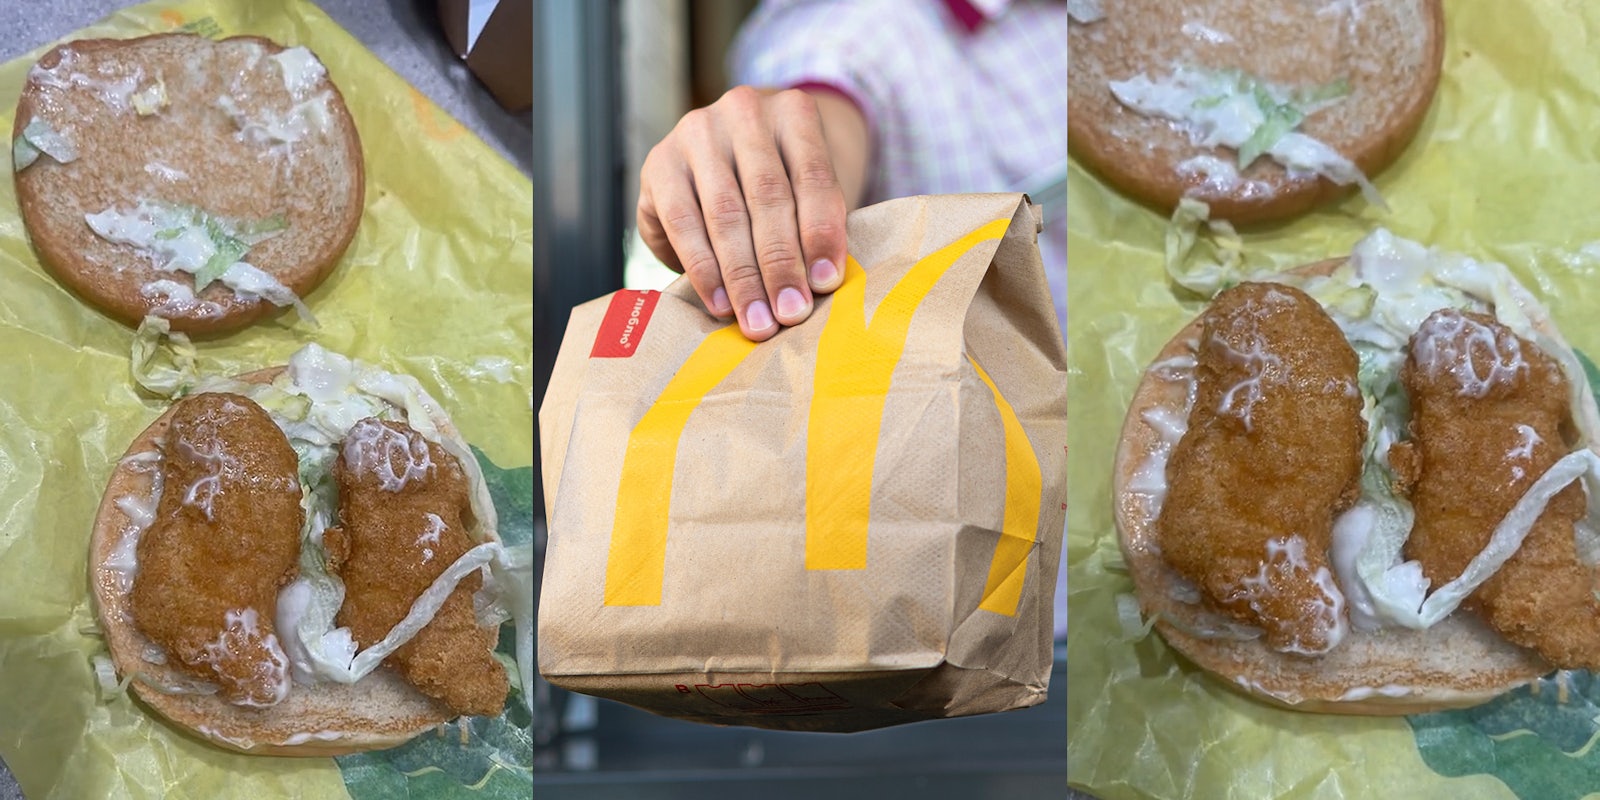 McChicken sandwich opened with 2 chicken nuggets instead of patty (l) McDonald's drive through window worker handing bag of food out (c) McChicken sandwich opened with 2 chicken nuggets instead of patty (r)